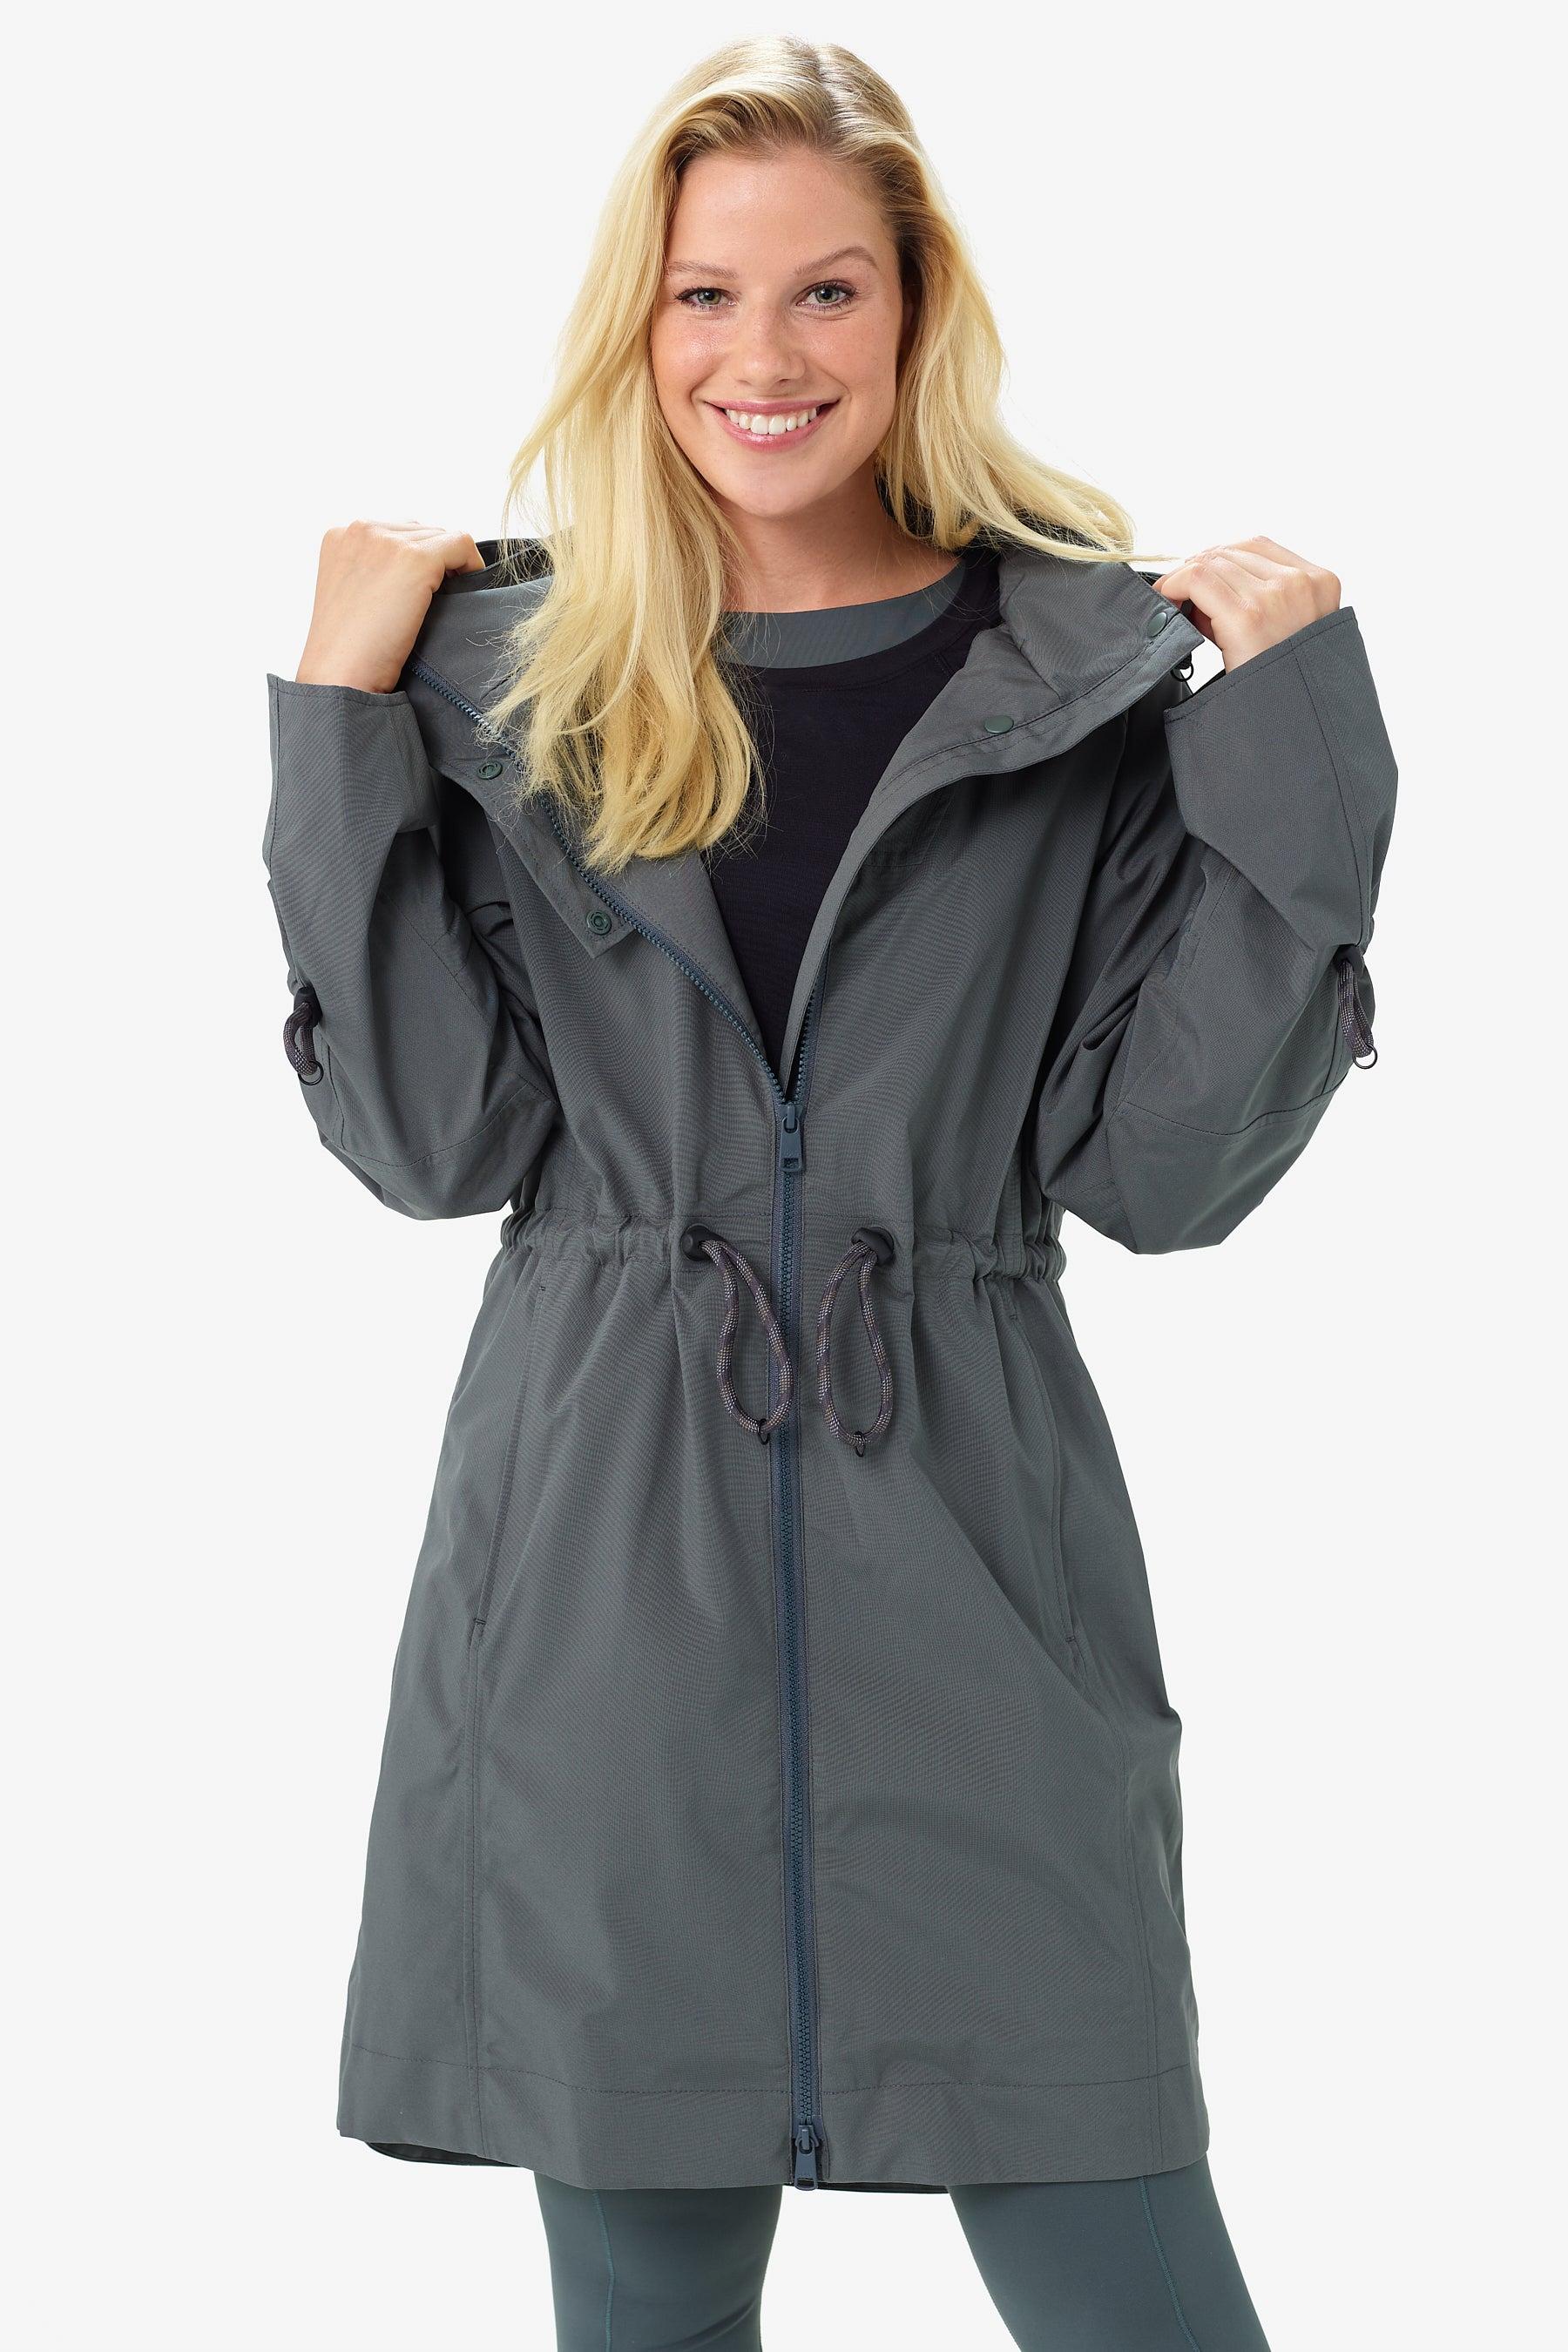 Lolë Piper Packable Into A Backpack Rain Jacket | Lyst